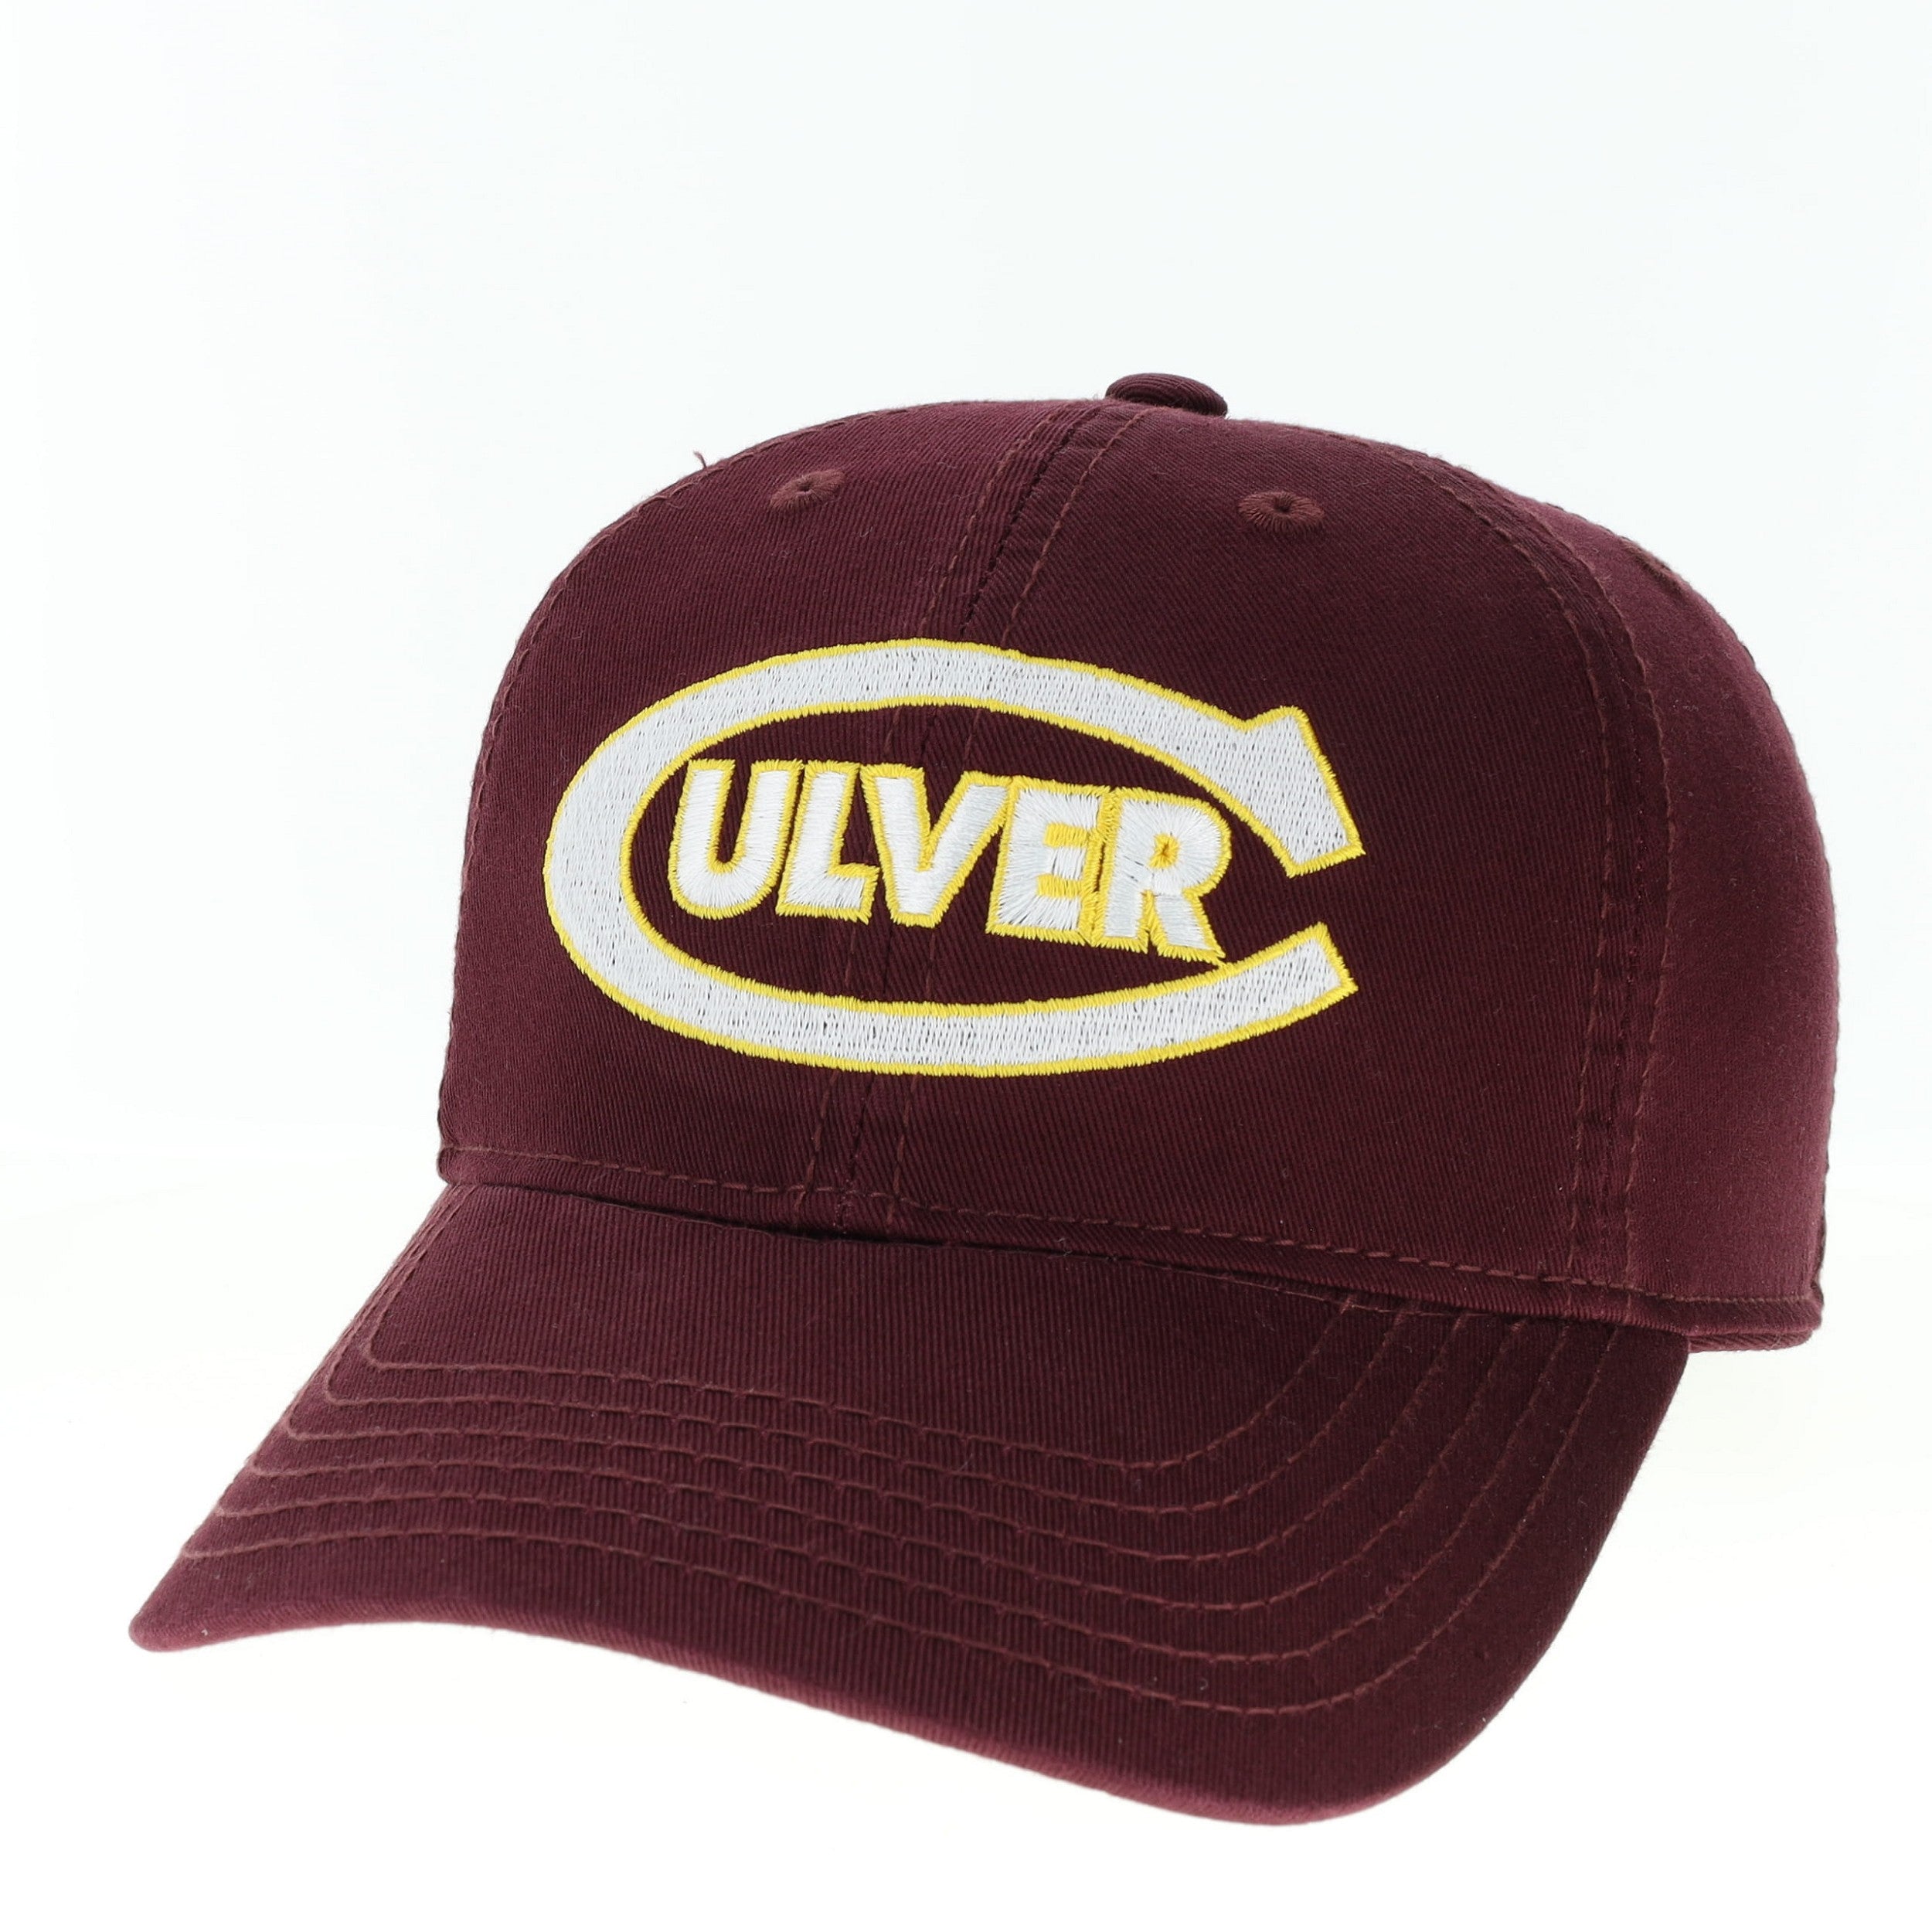 Youth Relaxed Twill Culver Cap - Maroon